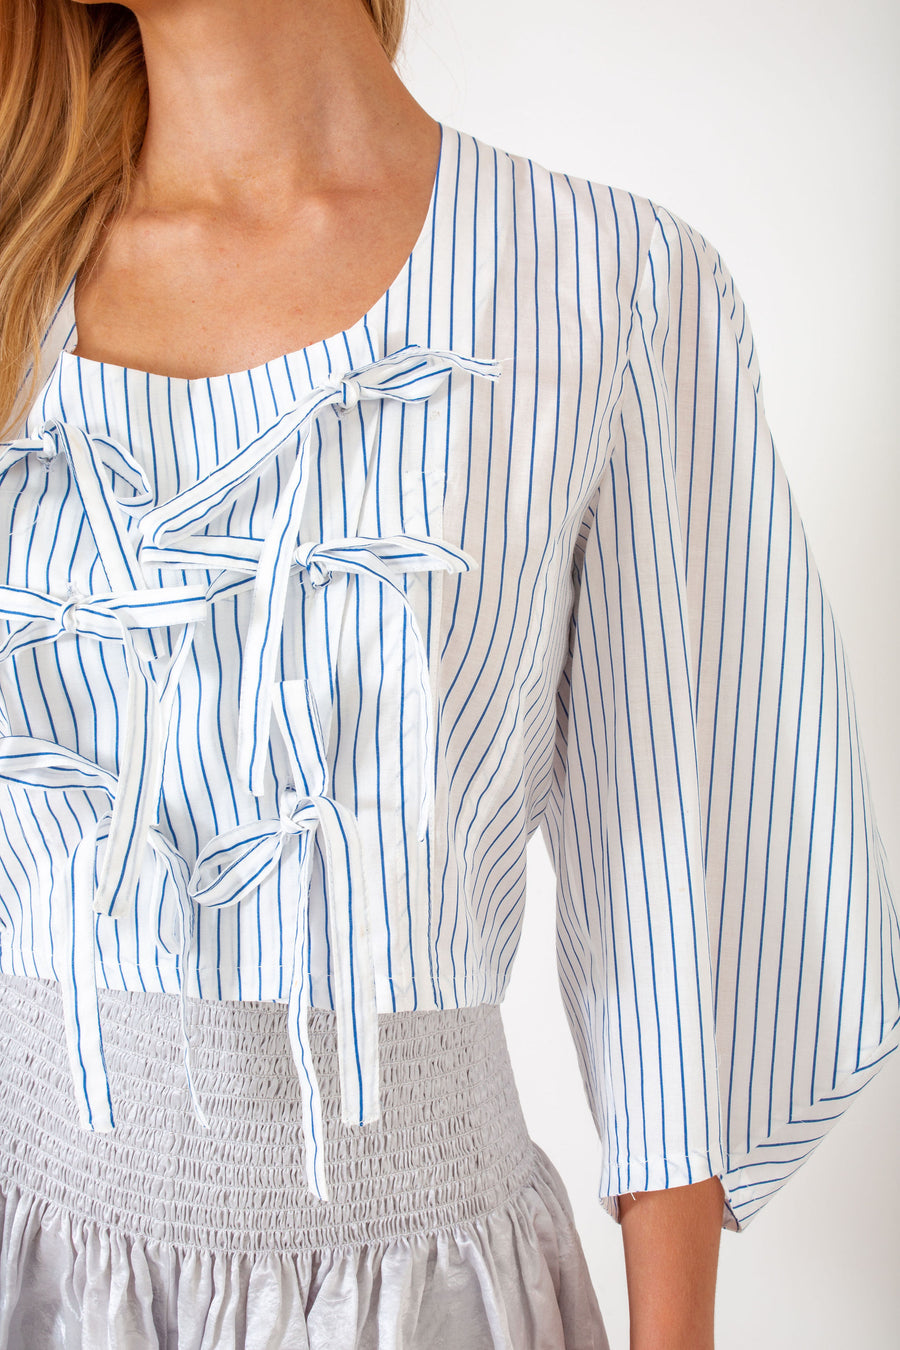 CONLEY TOP NAUTICAL STRIPE *LIMITED*EDITION*